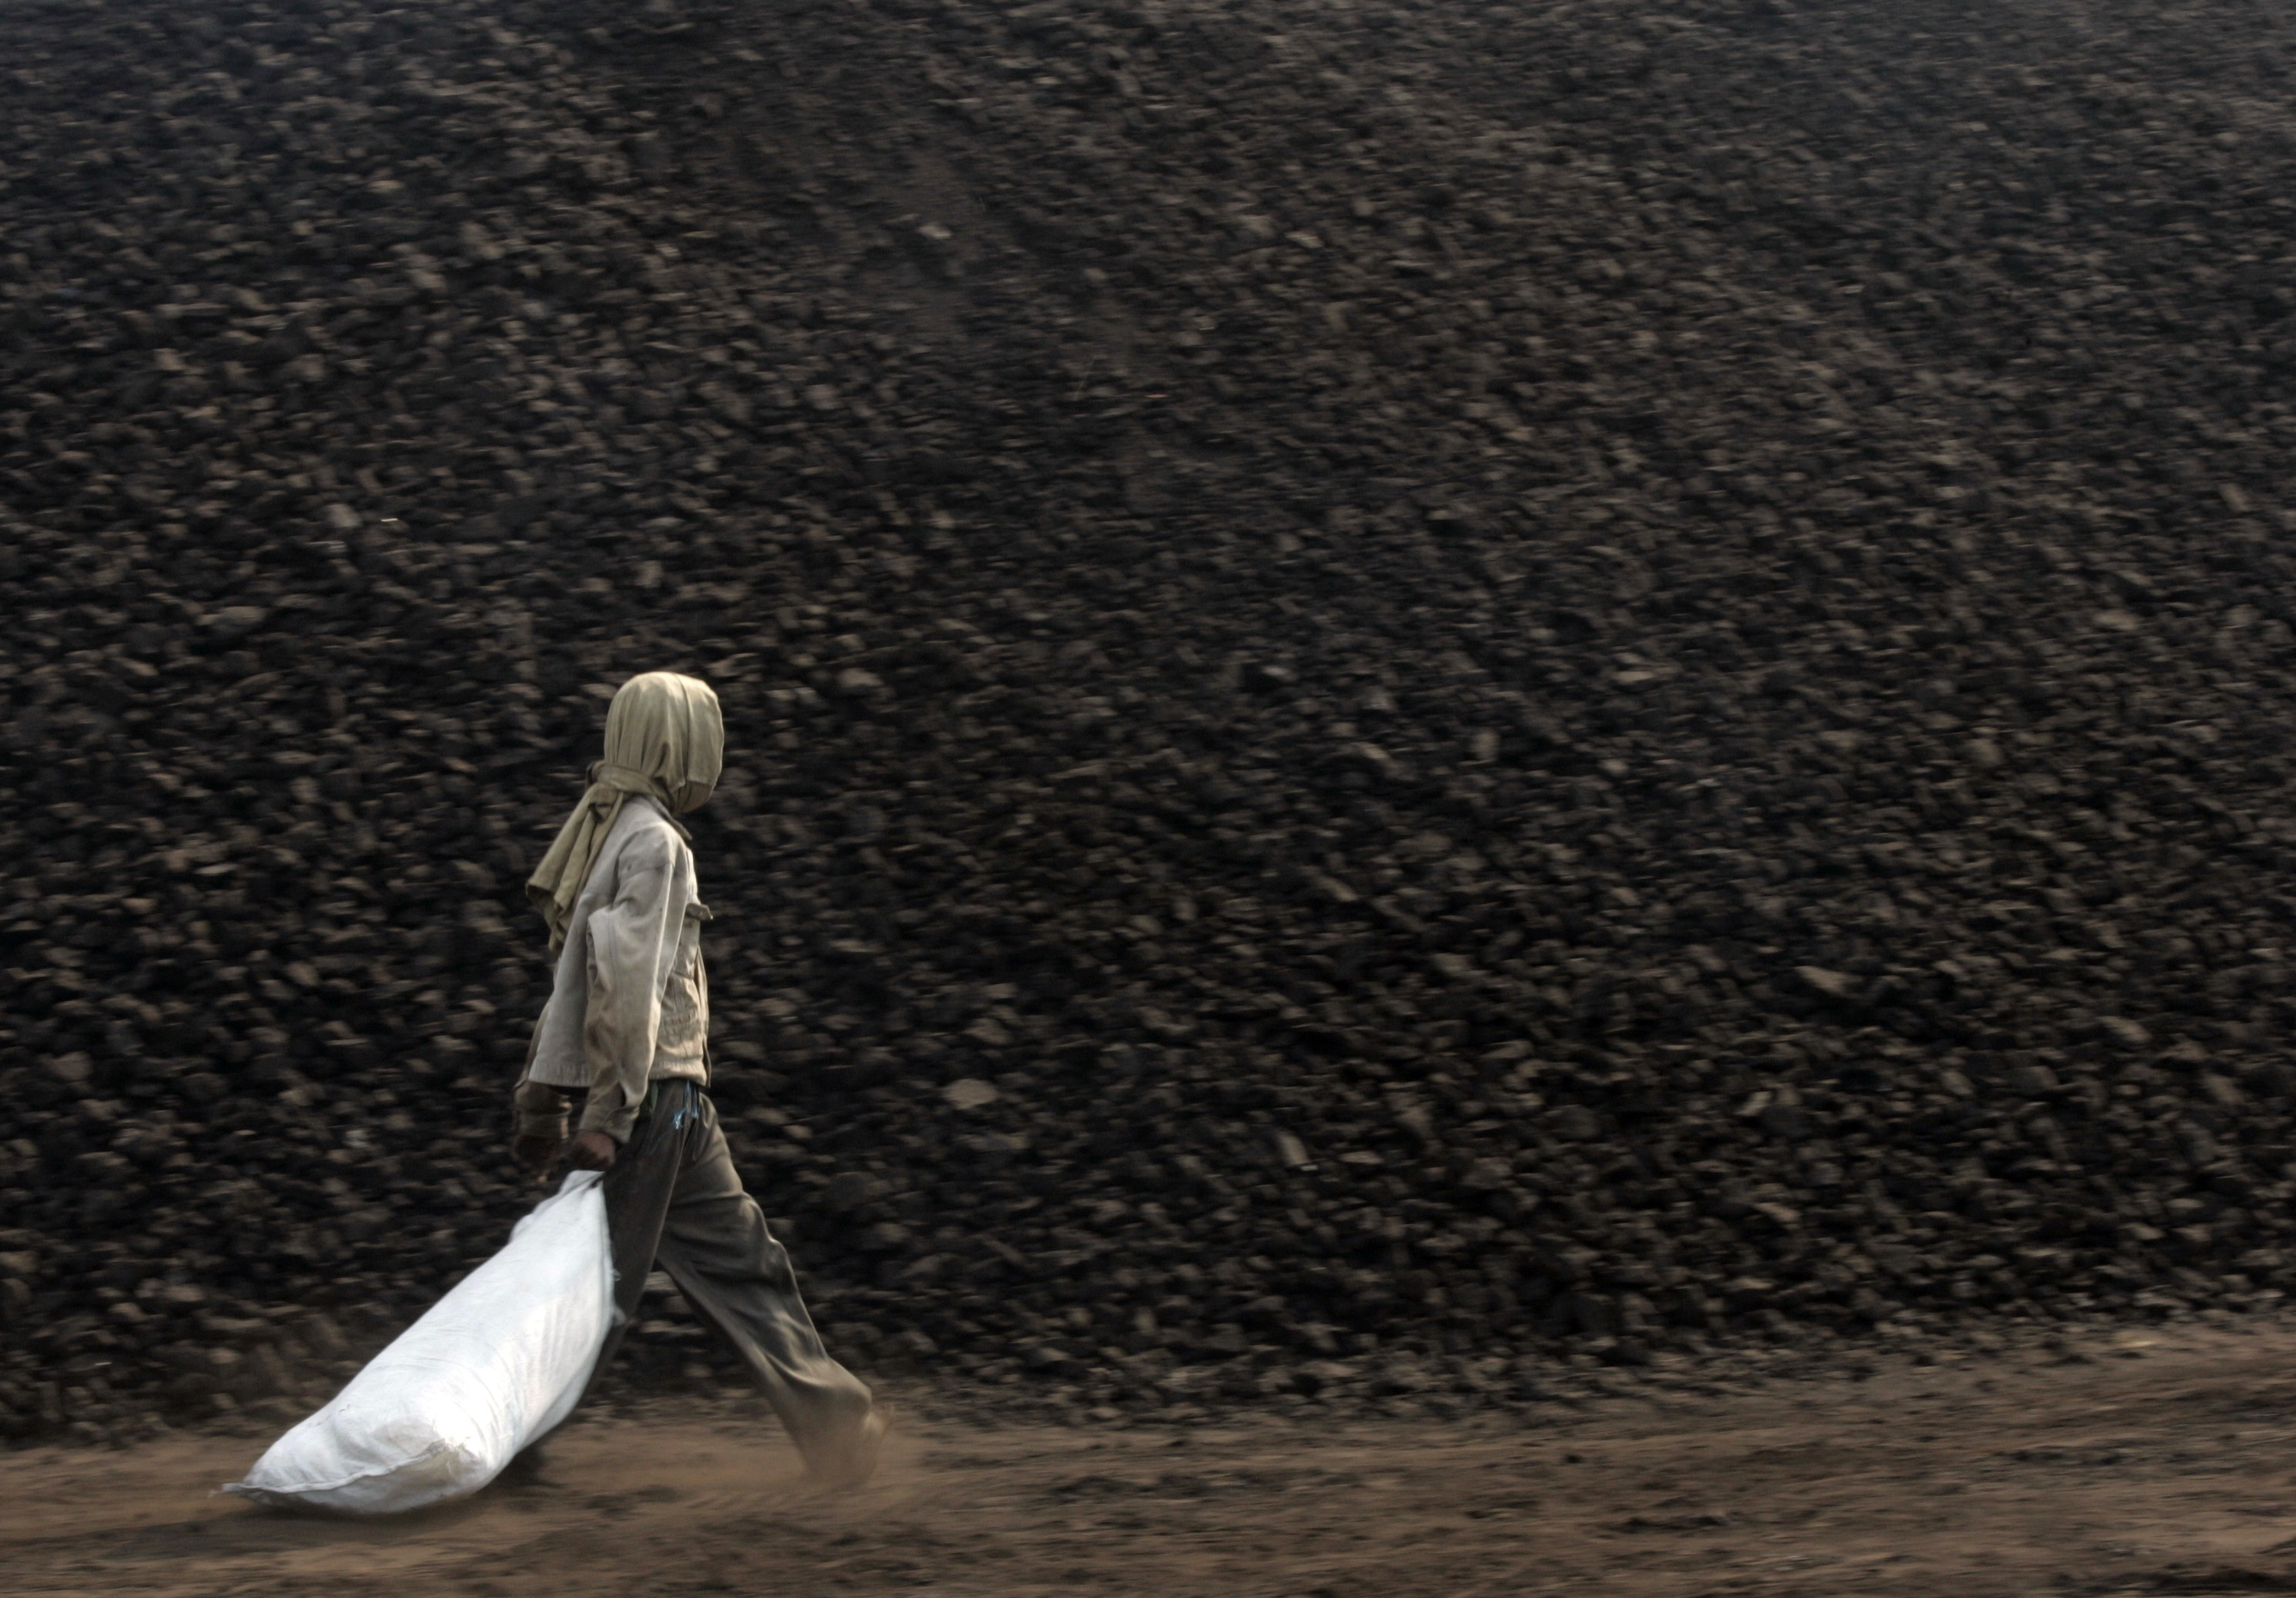 Worker carries a plastic bag as he walks in a coal stock pile port near Cilegon habour of West Java province